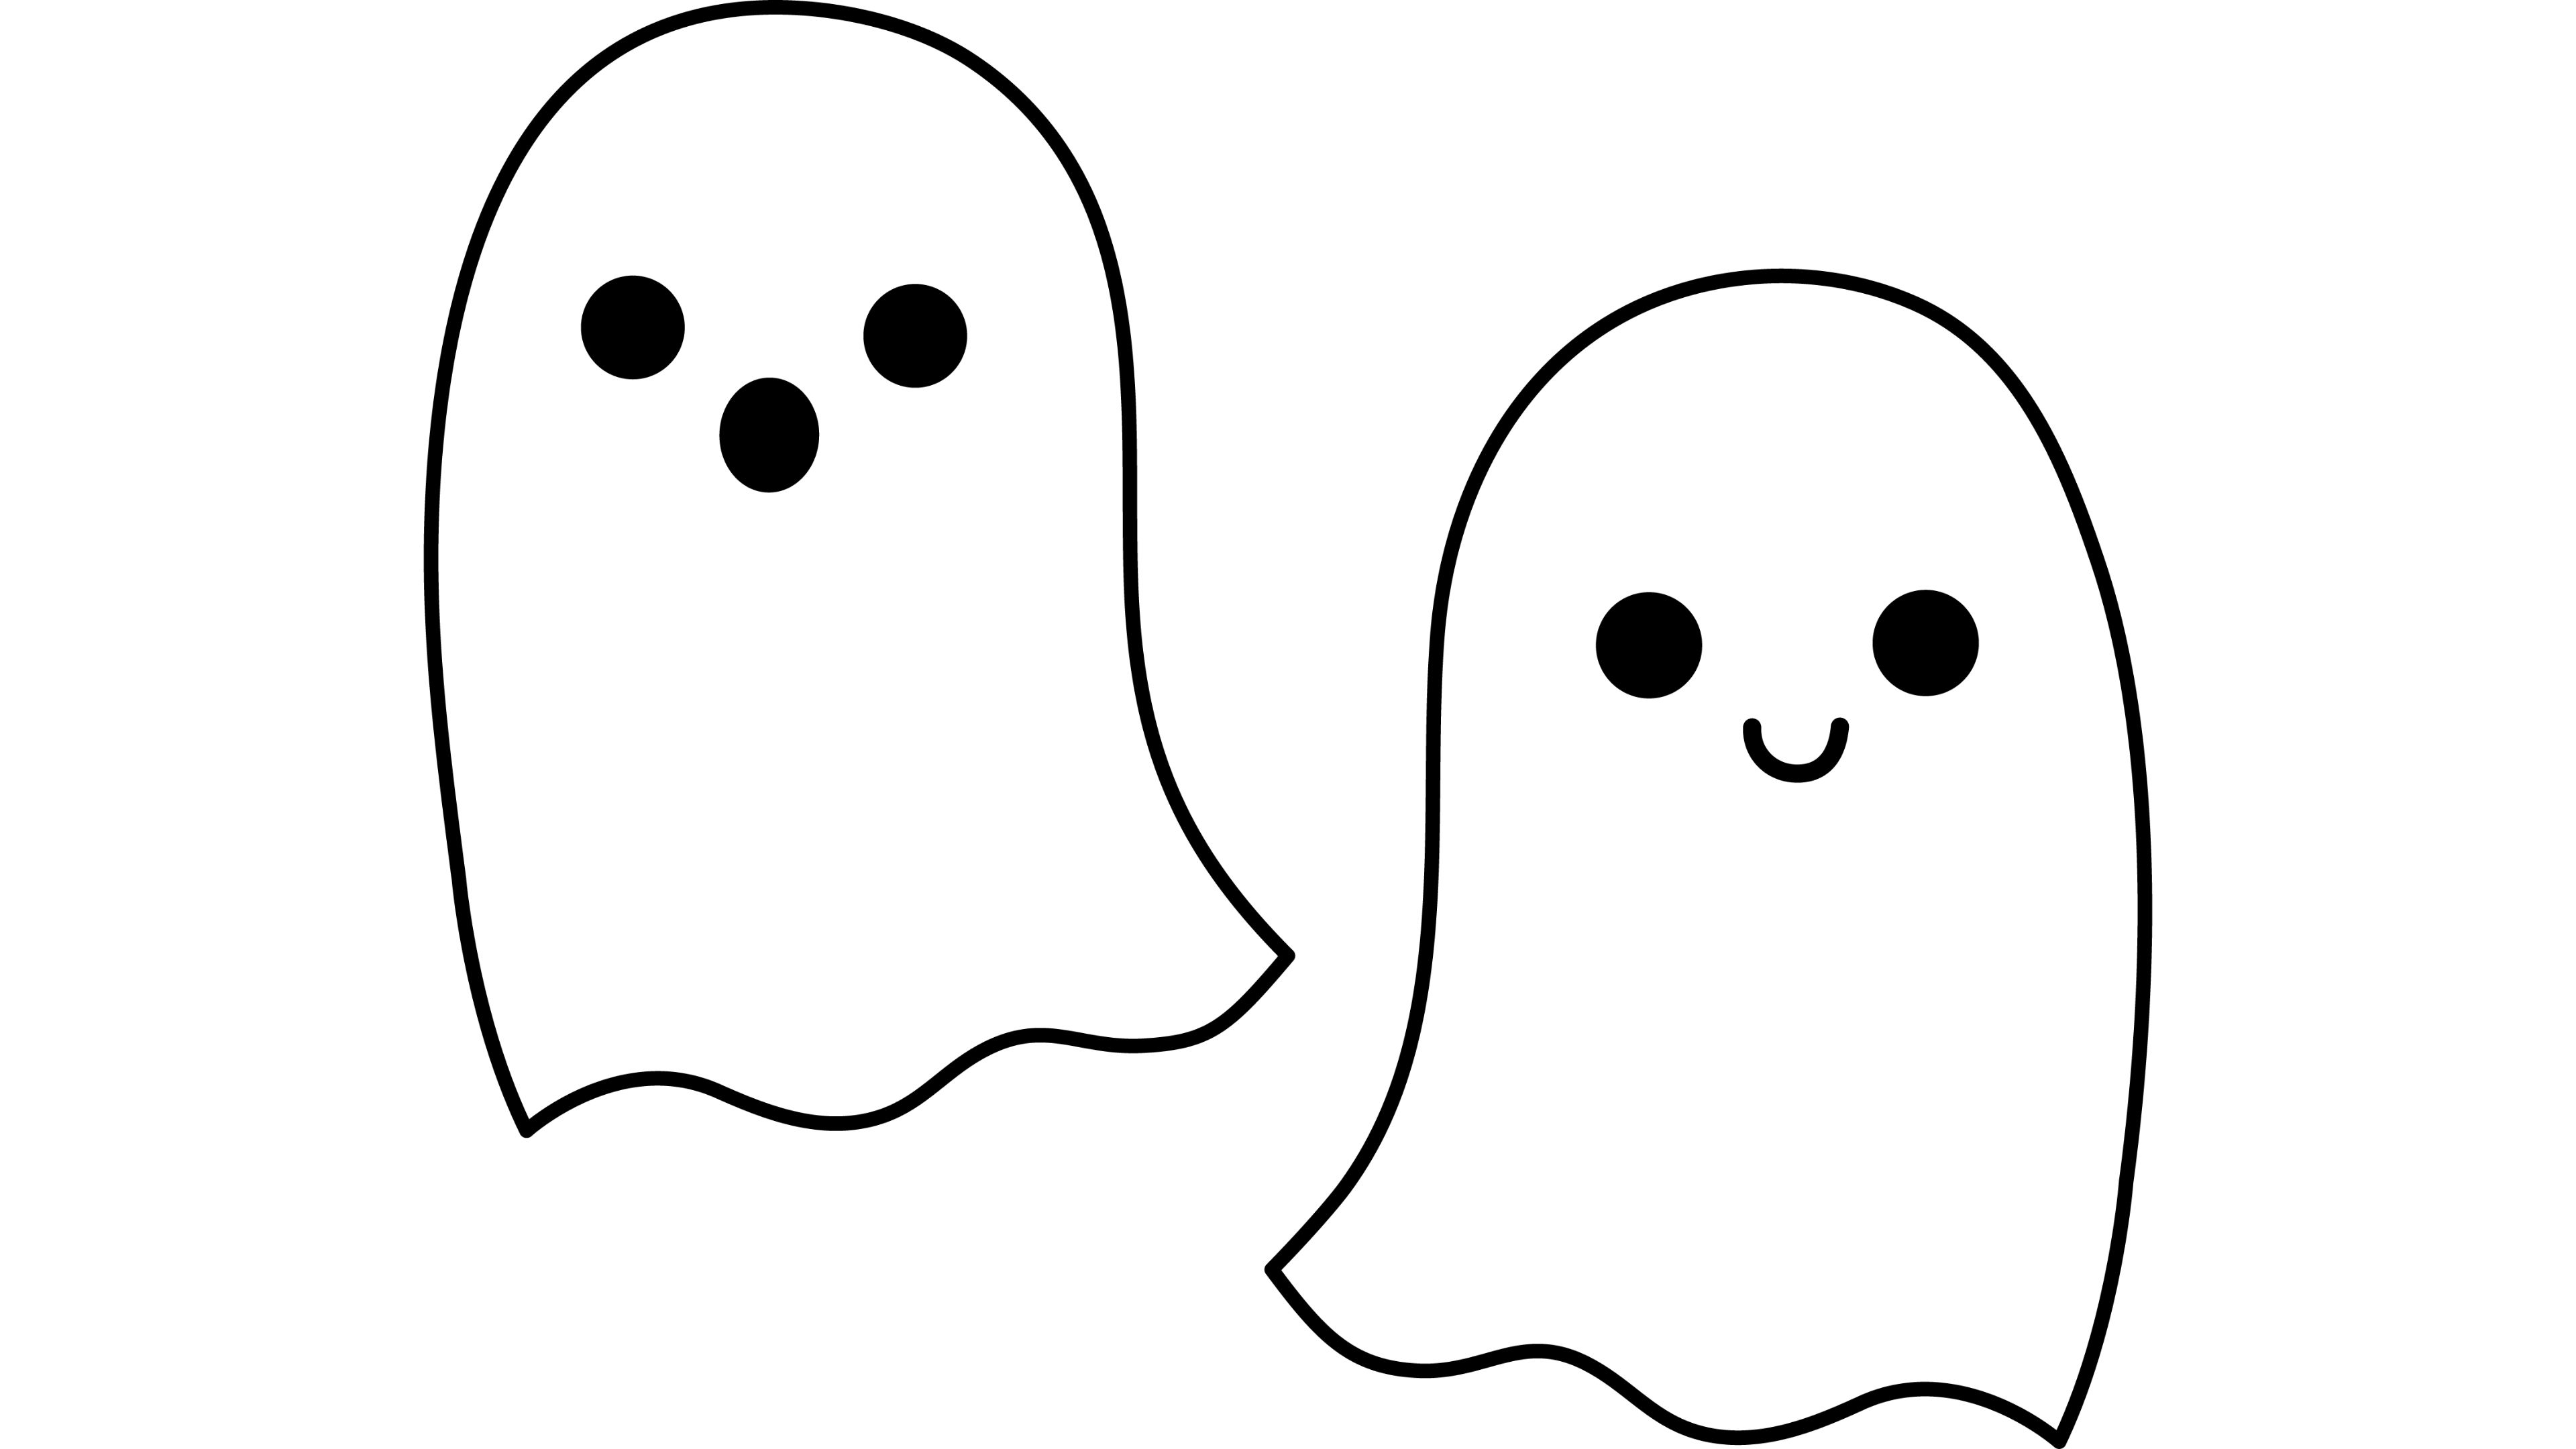 90 Black And White Halloween Ghost Graphic Background Illustrations  RoyaltyFree Vector Graphics  Clip Art  iStock